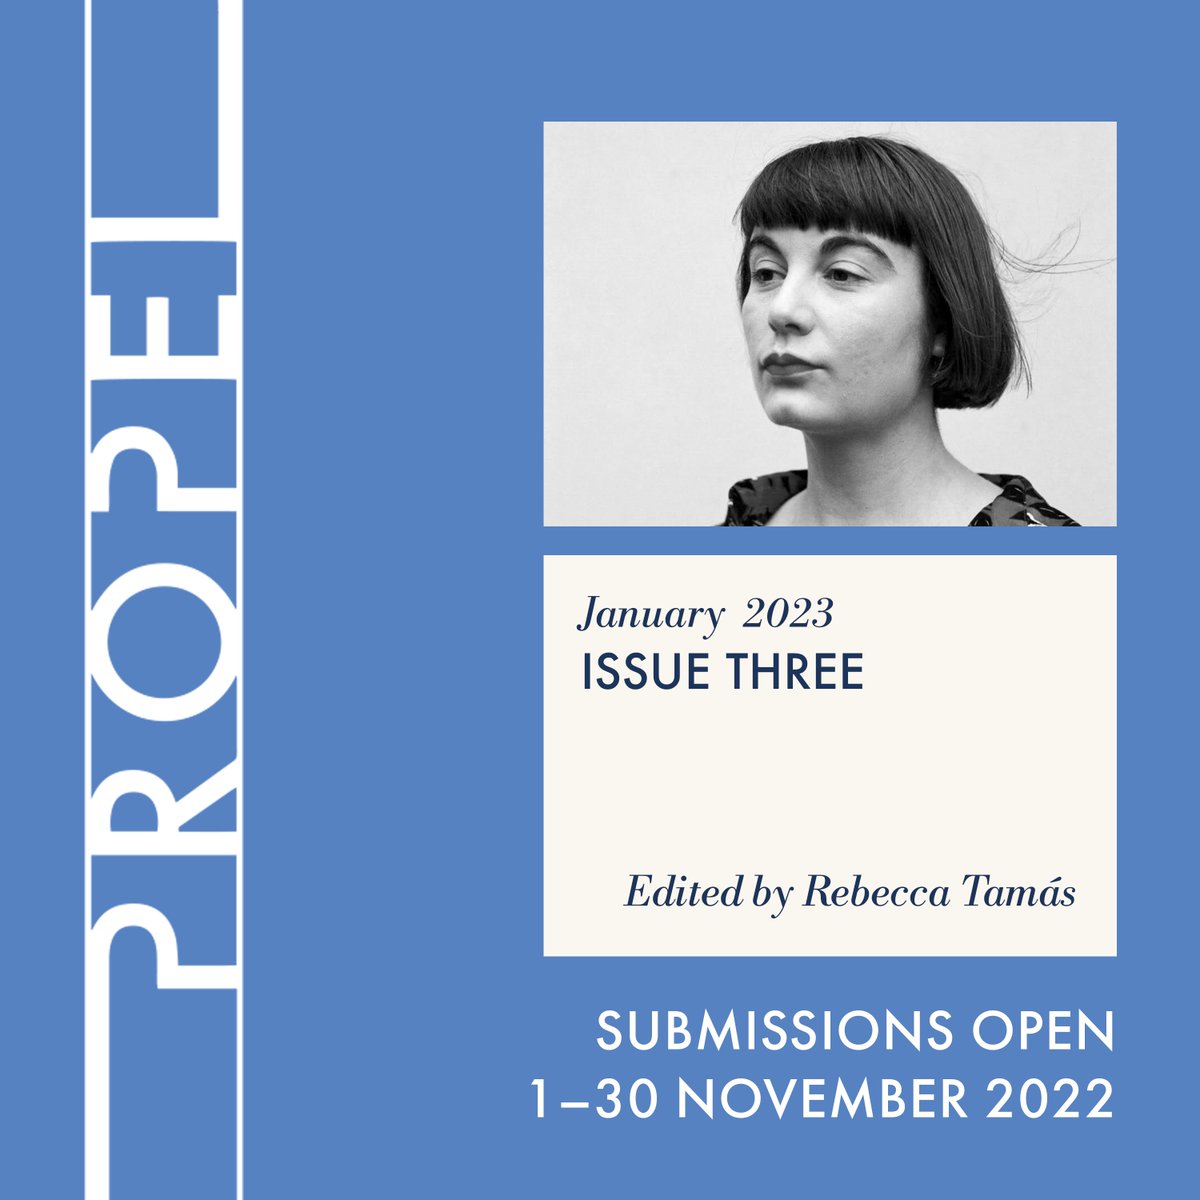 👀 News! We're very happy to announce that Issue Three of Propel will be edited by the inimitable Rebecca Tamás @RebTamas! > Issue Three submissions will be open 1–30 November > sign up to our mailing list here, to receive a reminder in your inbox: propelmagazine.co.uk/subscribe